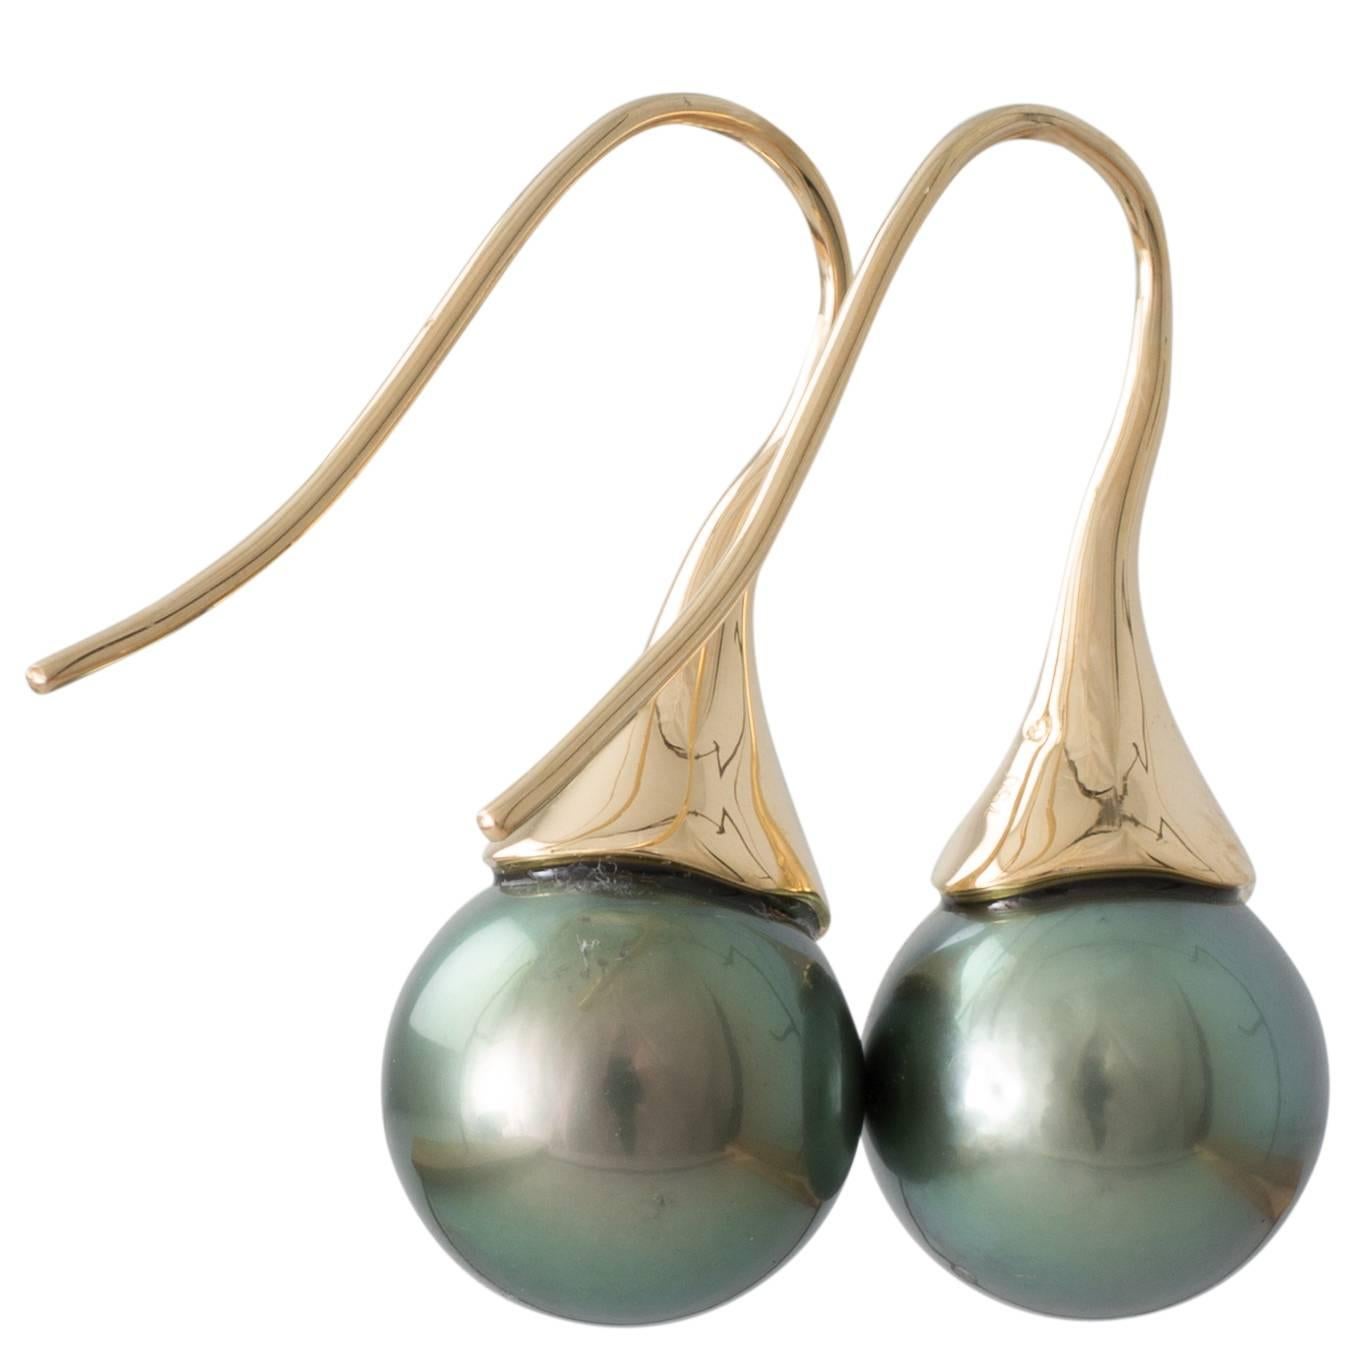 A pair of round green Tahitian South Sea pearl tulip hook earrings in 18ct yellow gold with pearls measuring 11.7 - 11.7mm with a good lustre and very few natural surface marks.